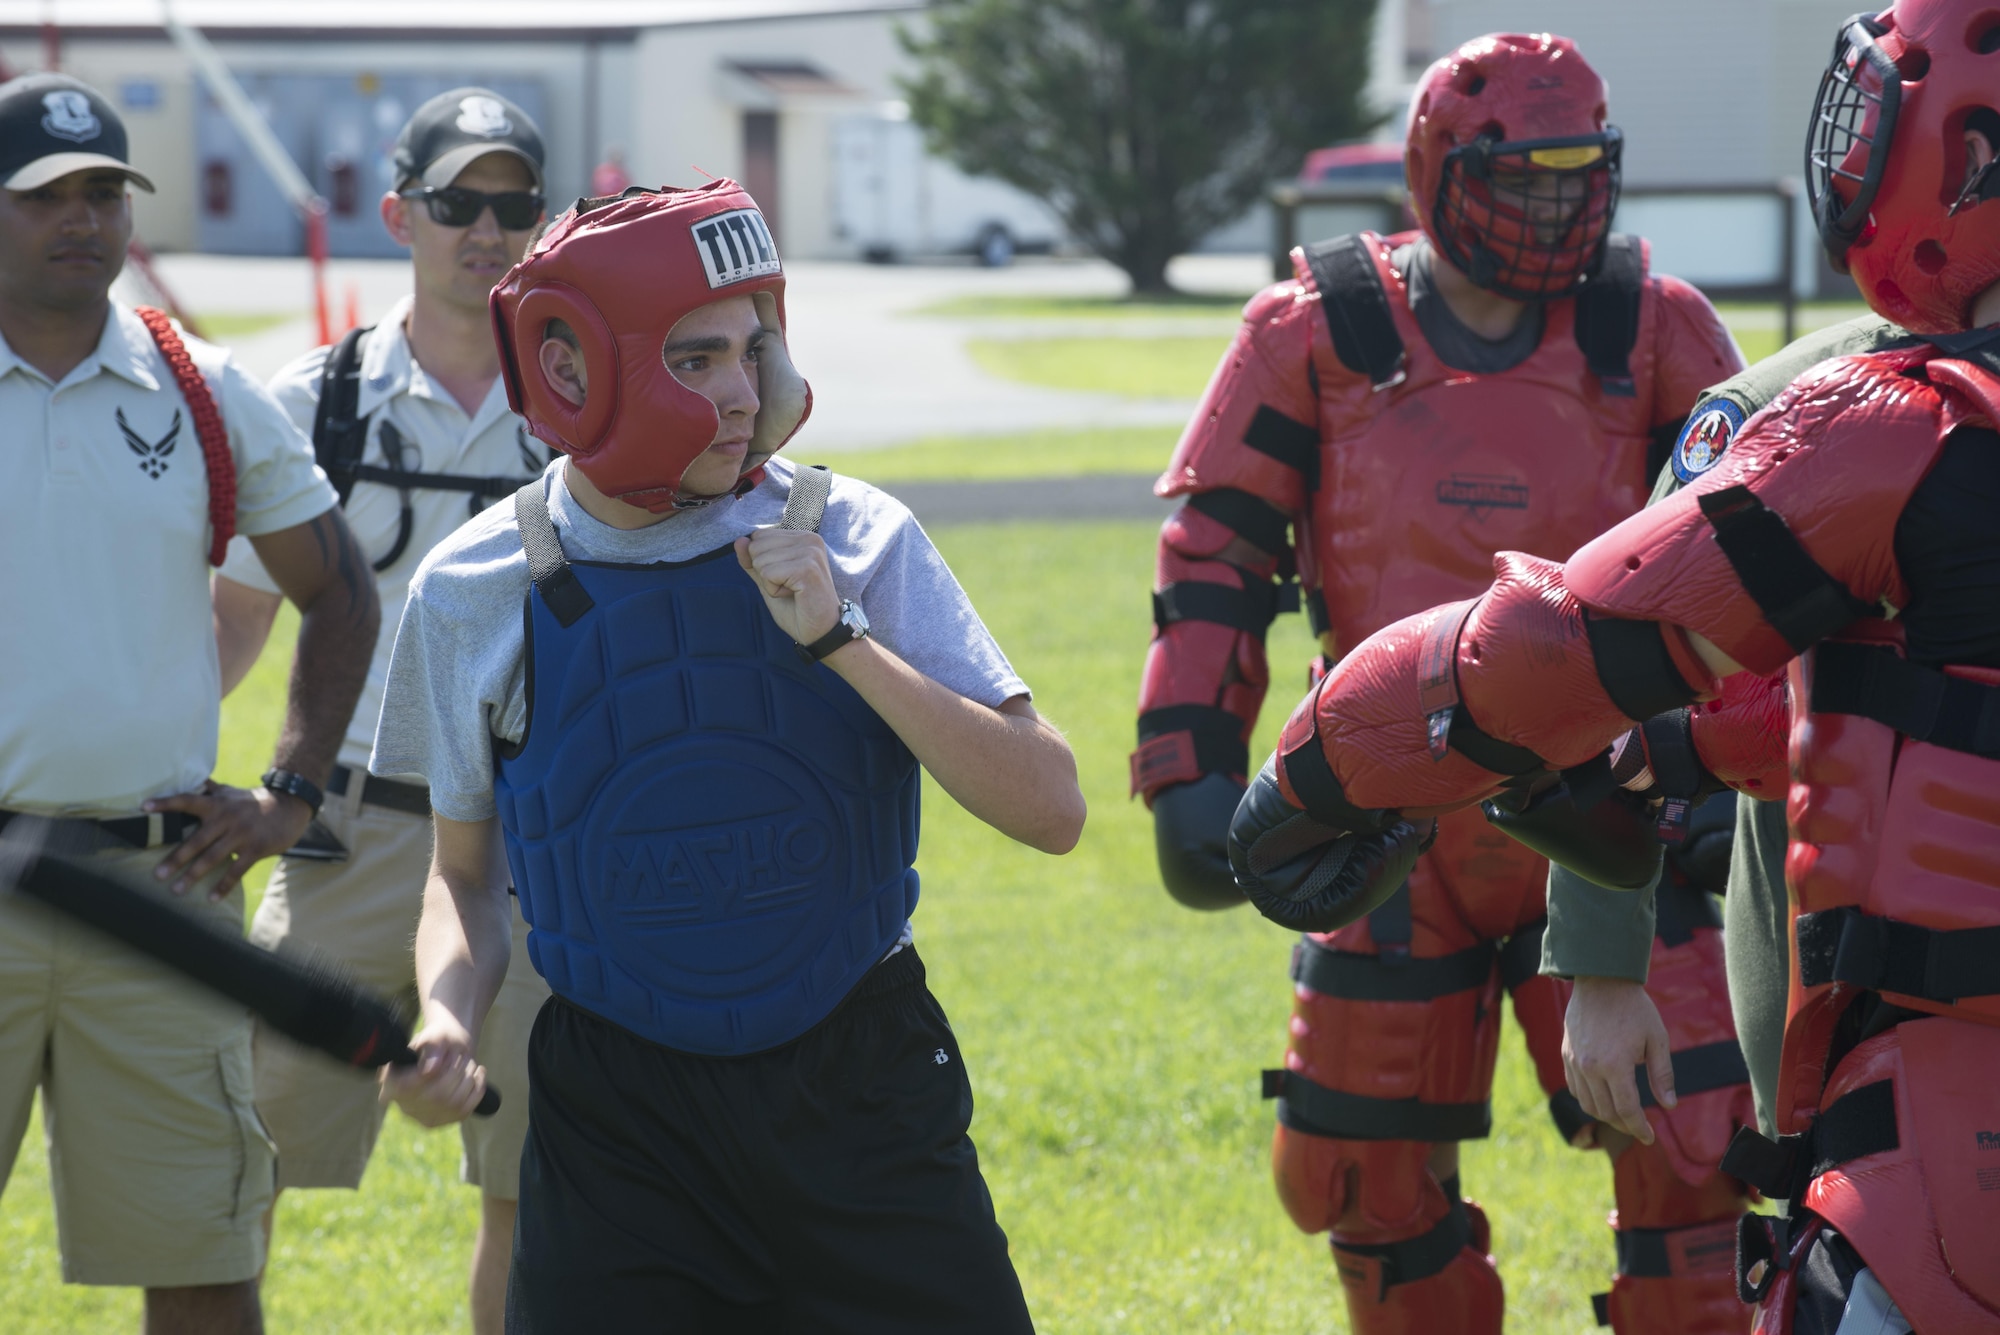 Ravens assigned to the 436th Security Forces Squadron, known for providing security for aircraft and aircrews in a deployed location, instruct baton fighting techniques during the Delaware Cadet Leadership Course June 21, 2017, at the Delaware National Guard training site at Bethany Beach, Del. During the training, cadets had the option to fight a ‘red man’ using the techniques learned that day. (U.S. Air Force photo by Staff Sgt. Jared Duhon)